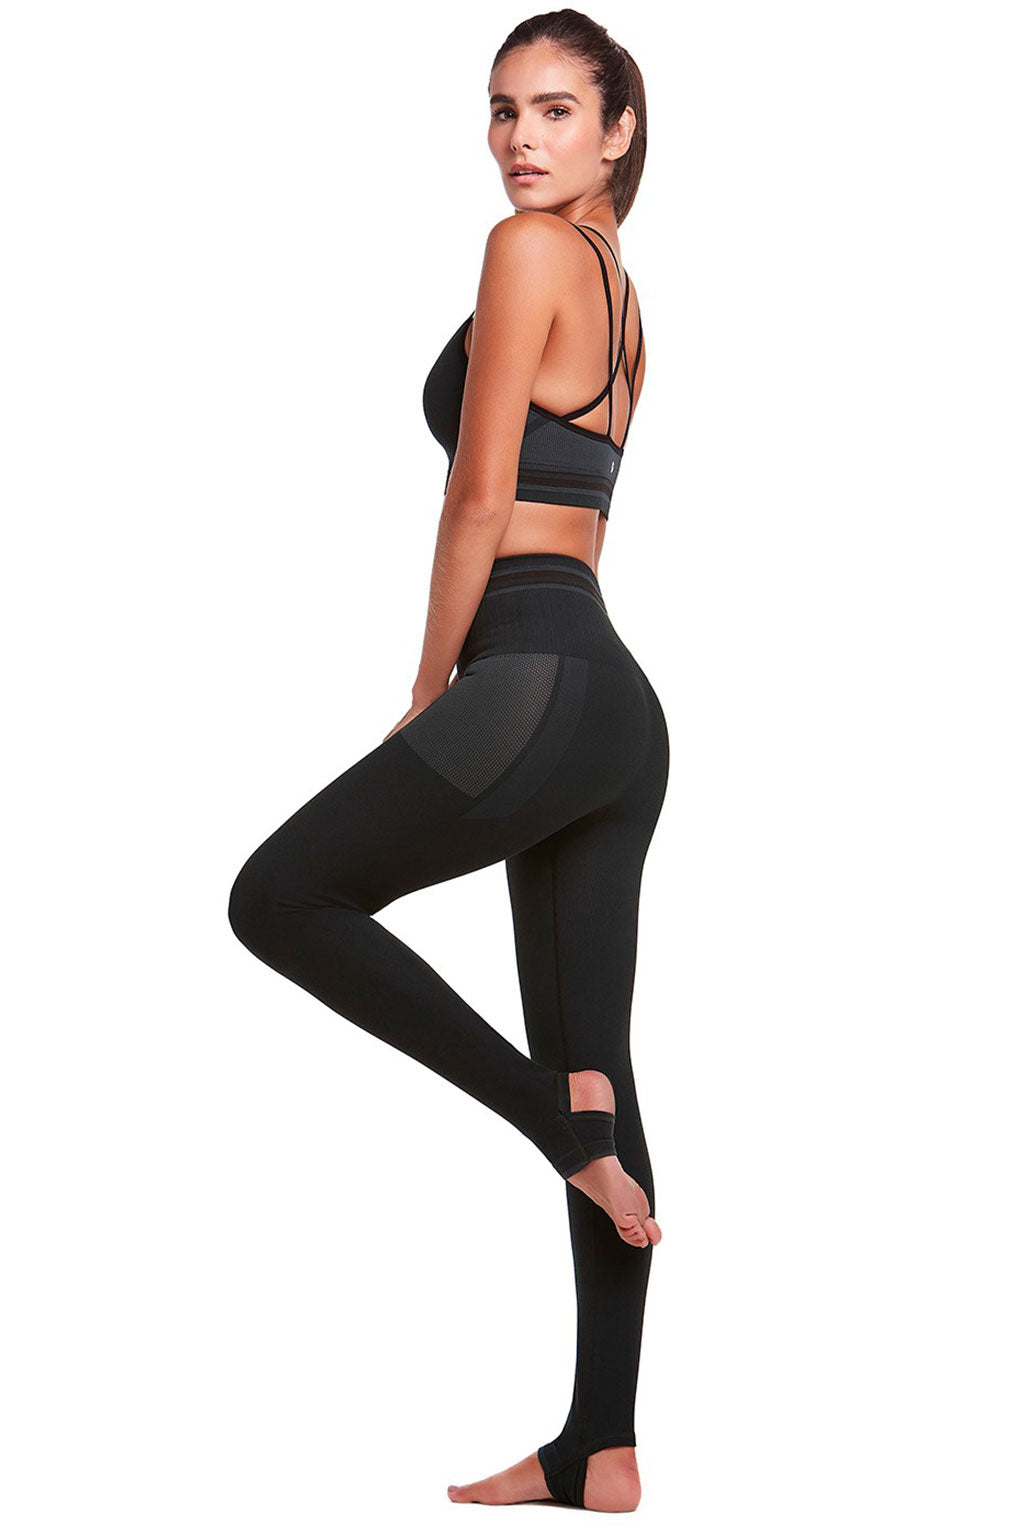 BASIC Fusion style Sport Legging with double and versatile